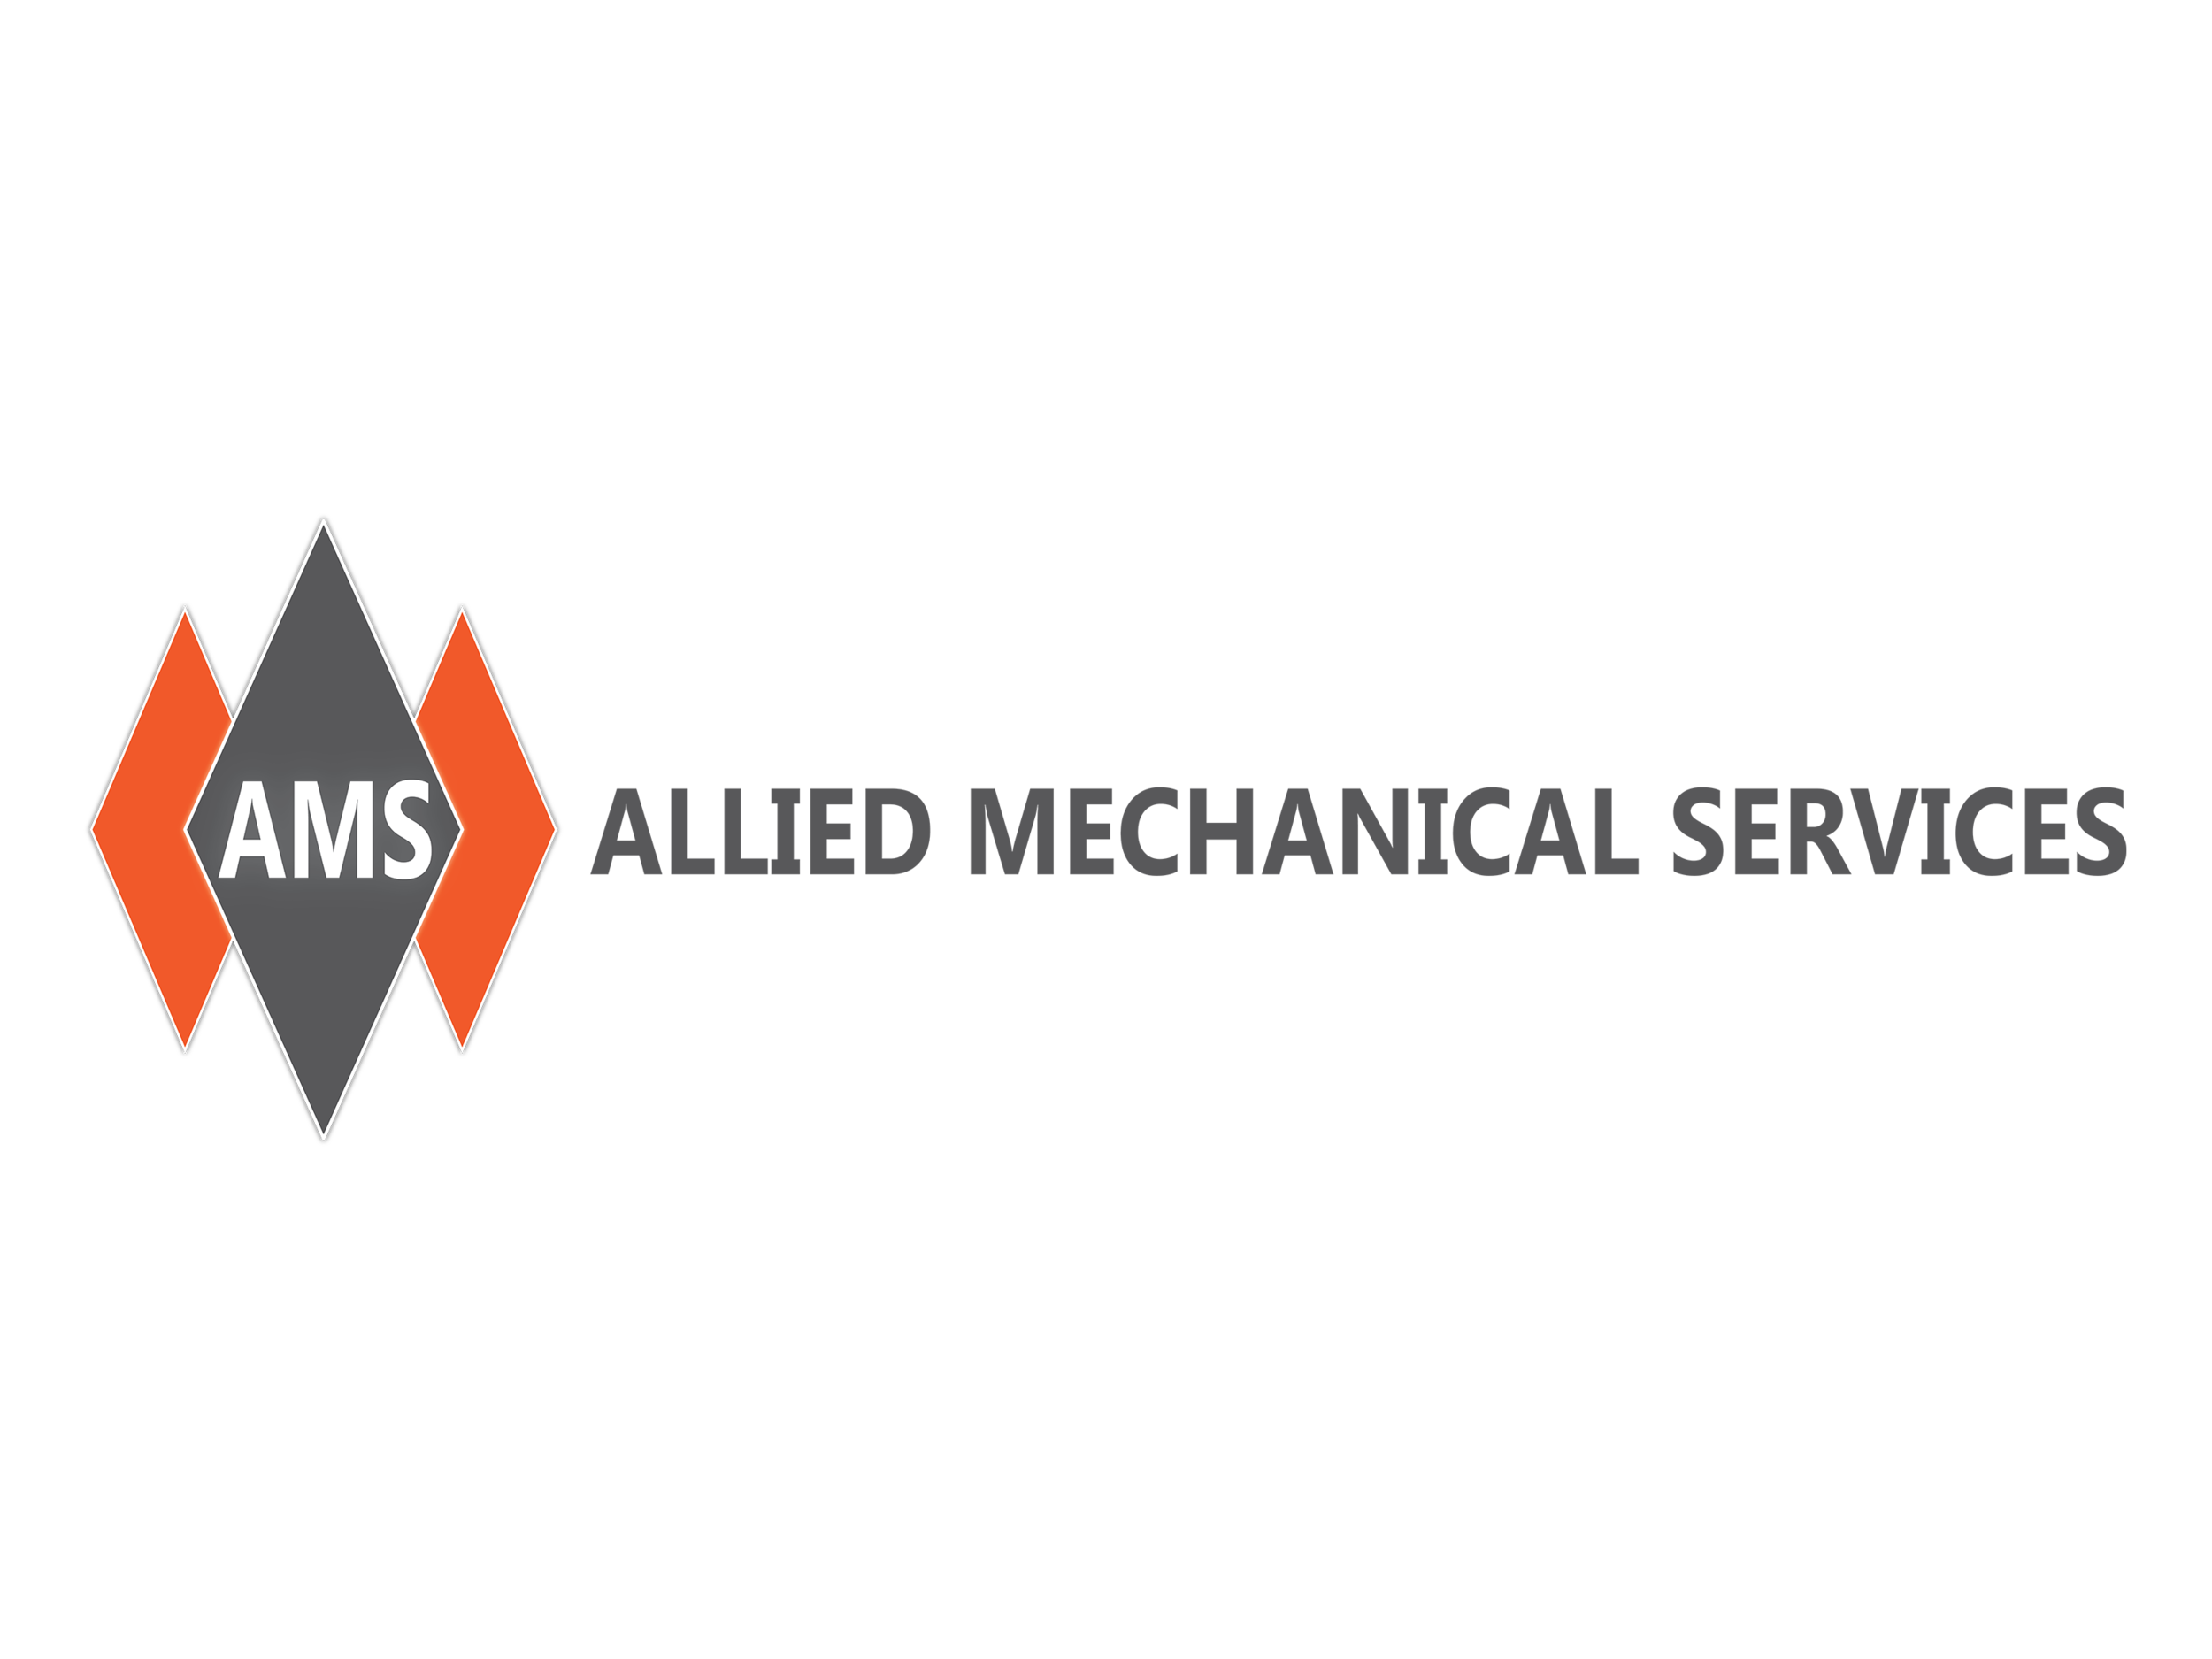 Allied Mechanical Services Logo 2018.png